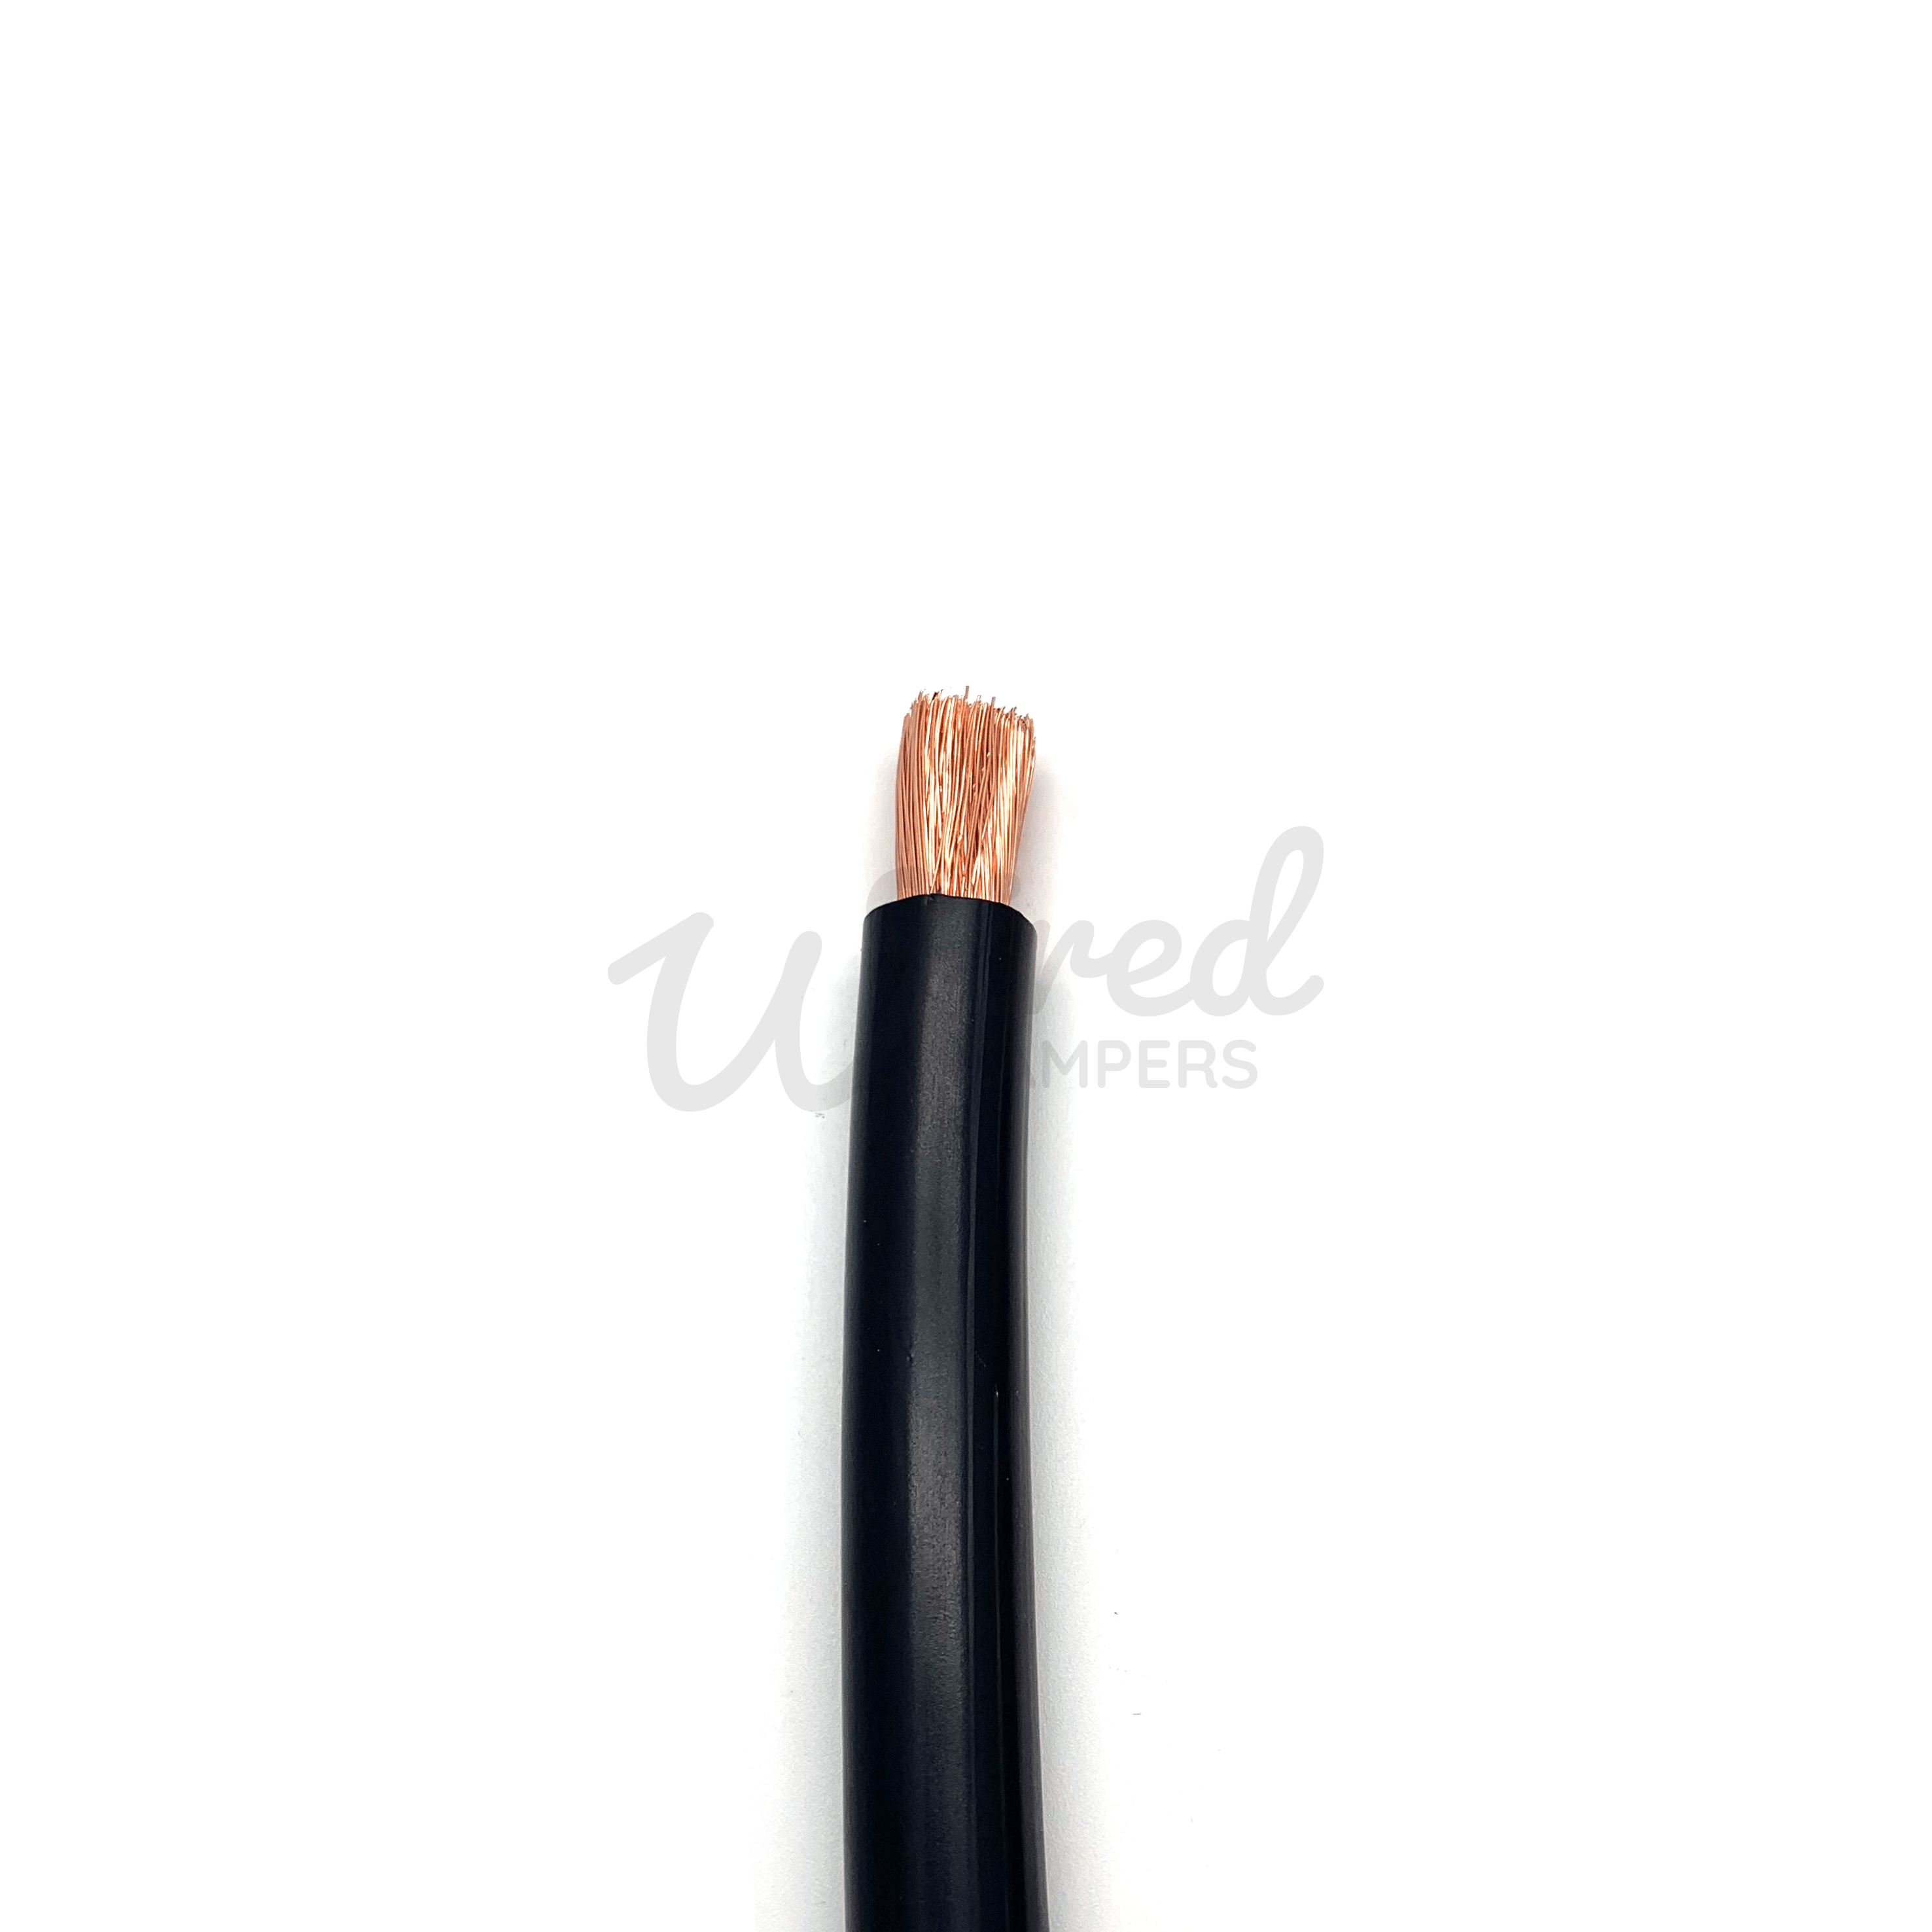 Wired Campers Limited 1M - 16mm² 110A Hi-Flex Battery/Welding/Inverter Flexible Cable - Black Negative